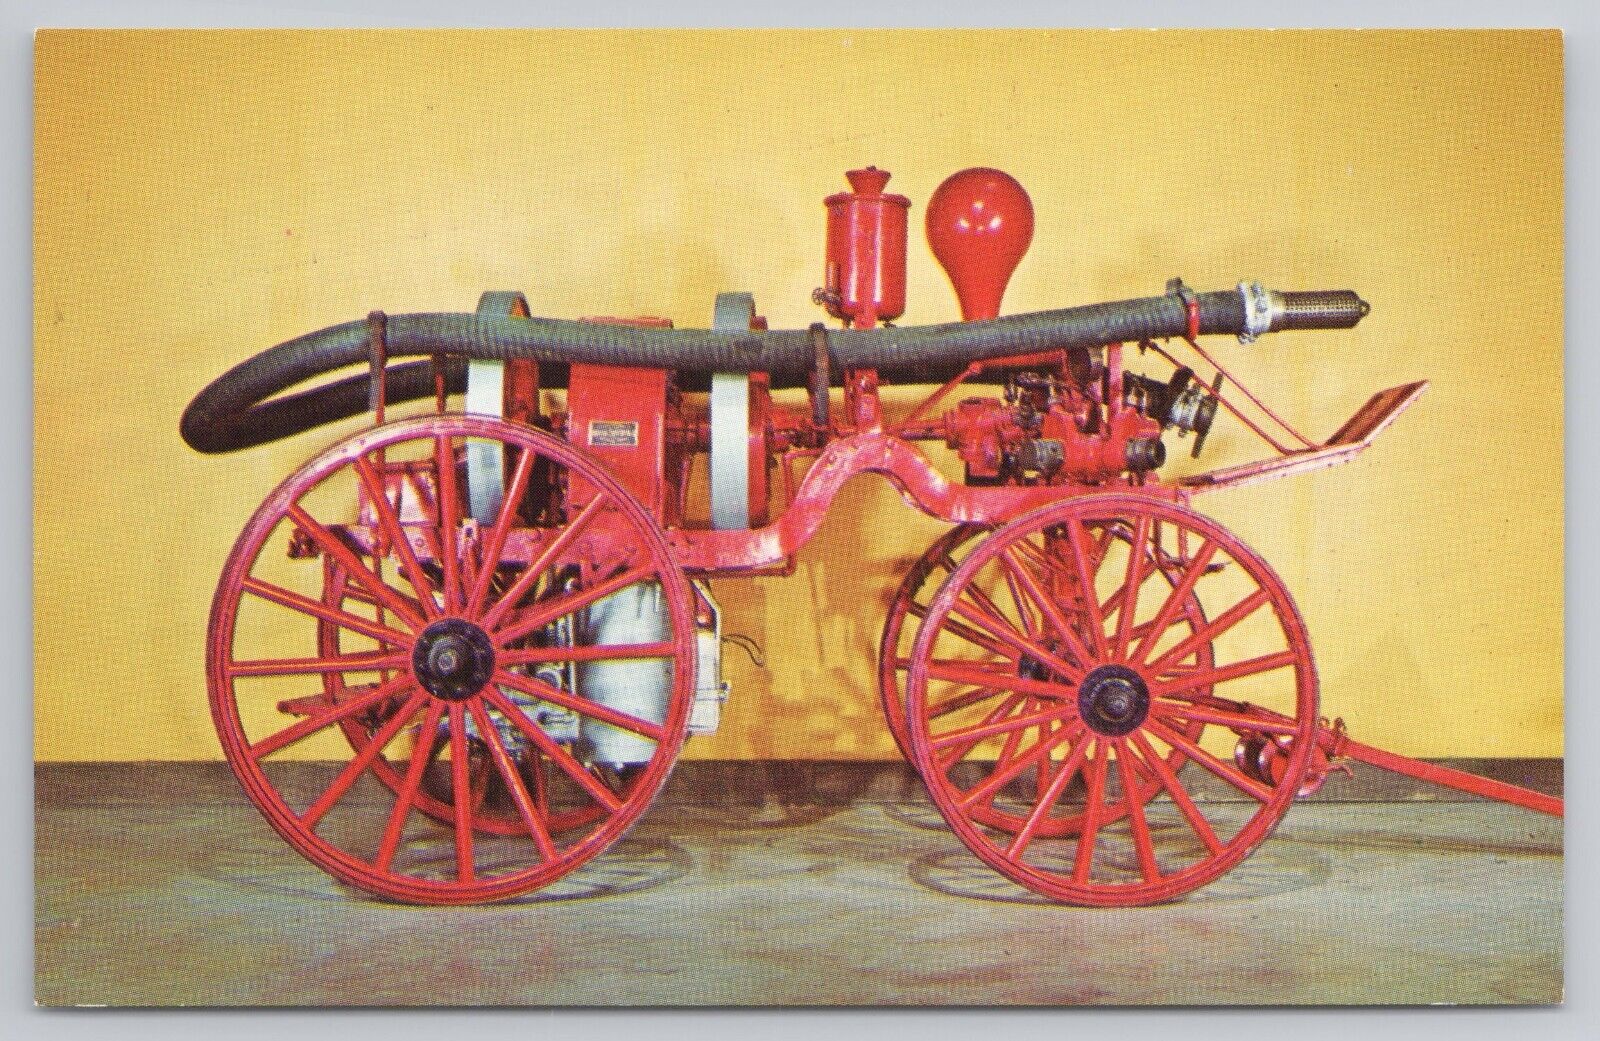 Ca 1900 Steam Fire Engine By Waterous Co At National Museum Ottawa Postcard